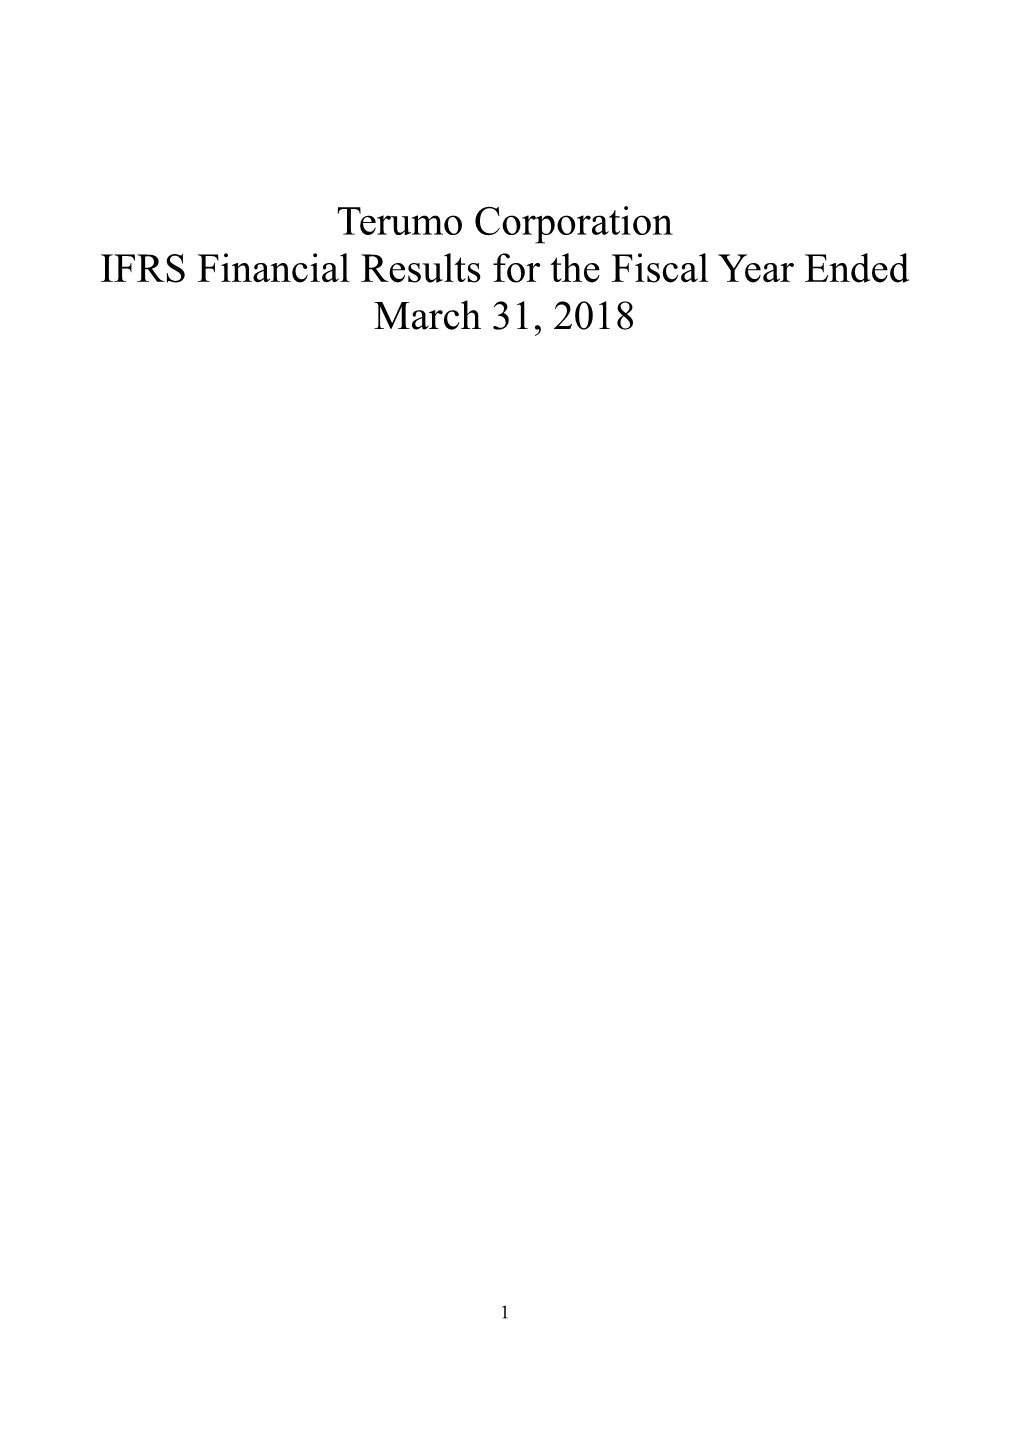 IFRS Financial Results for the Fiscal Year Ended March 31, 2018